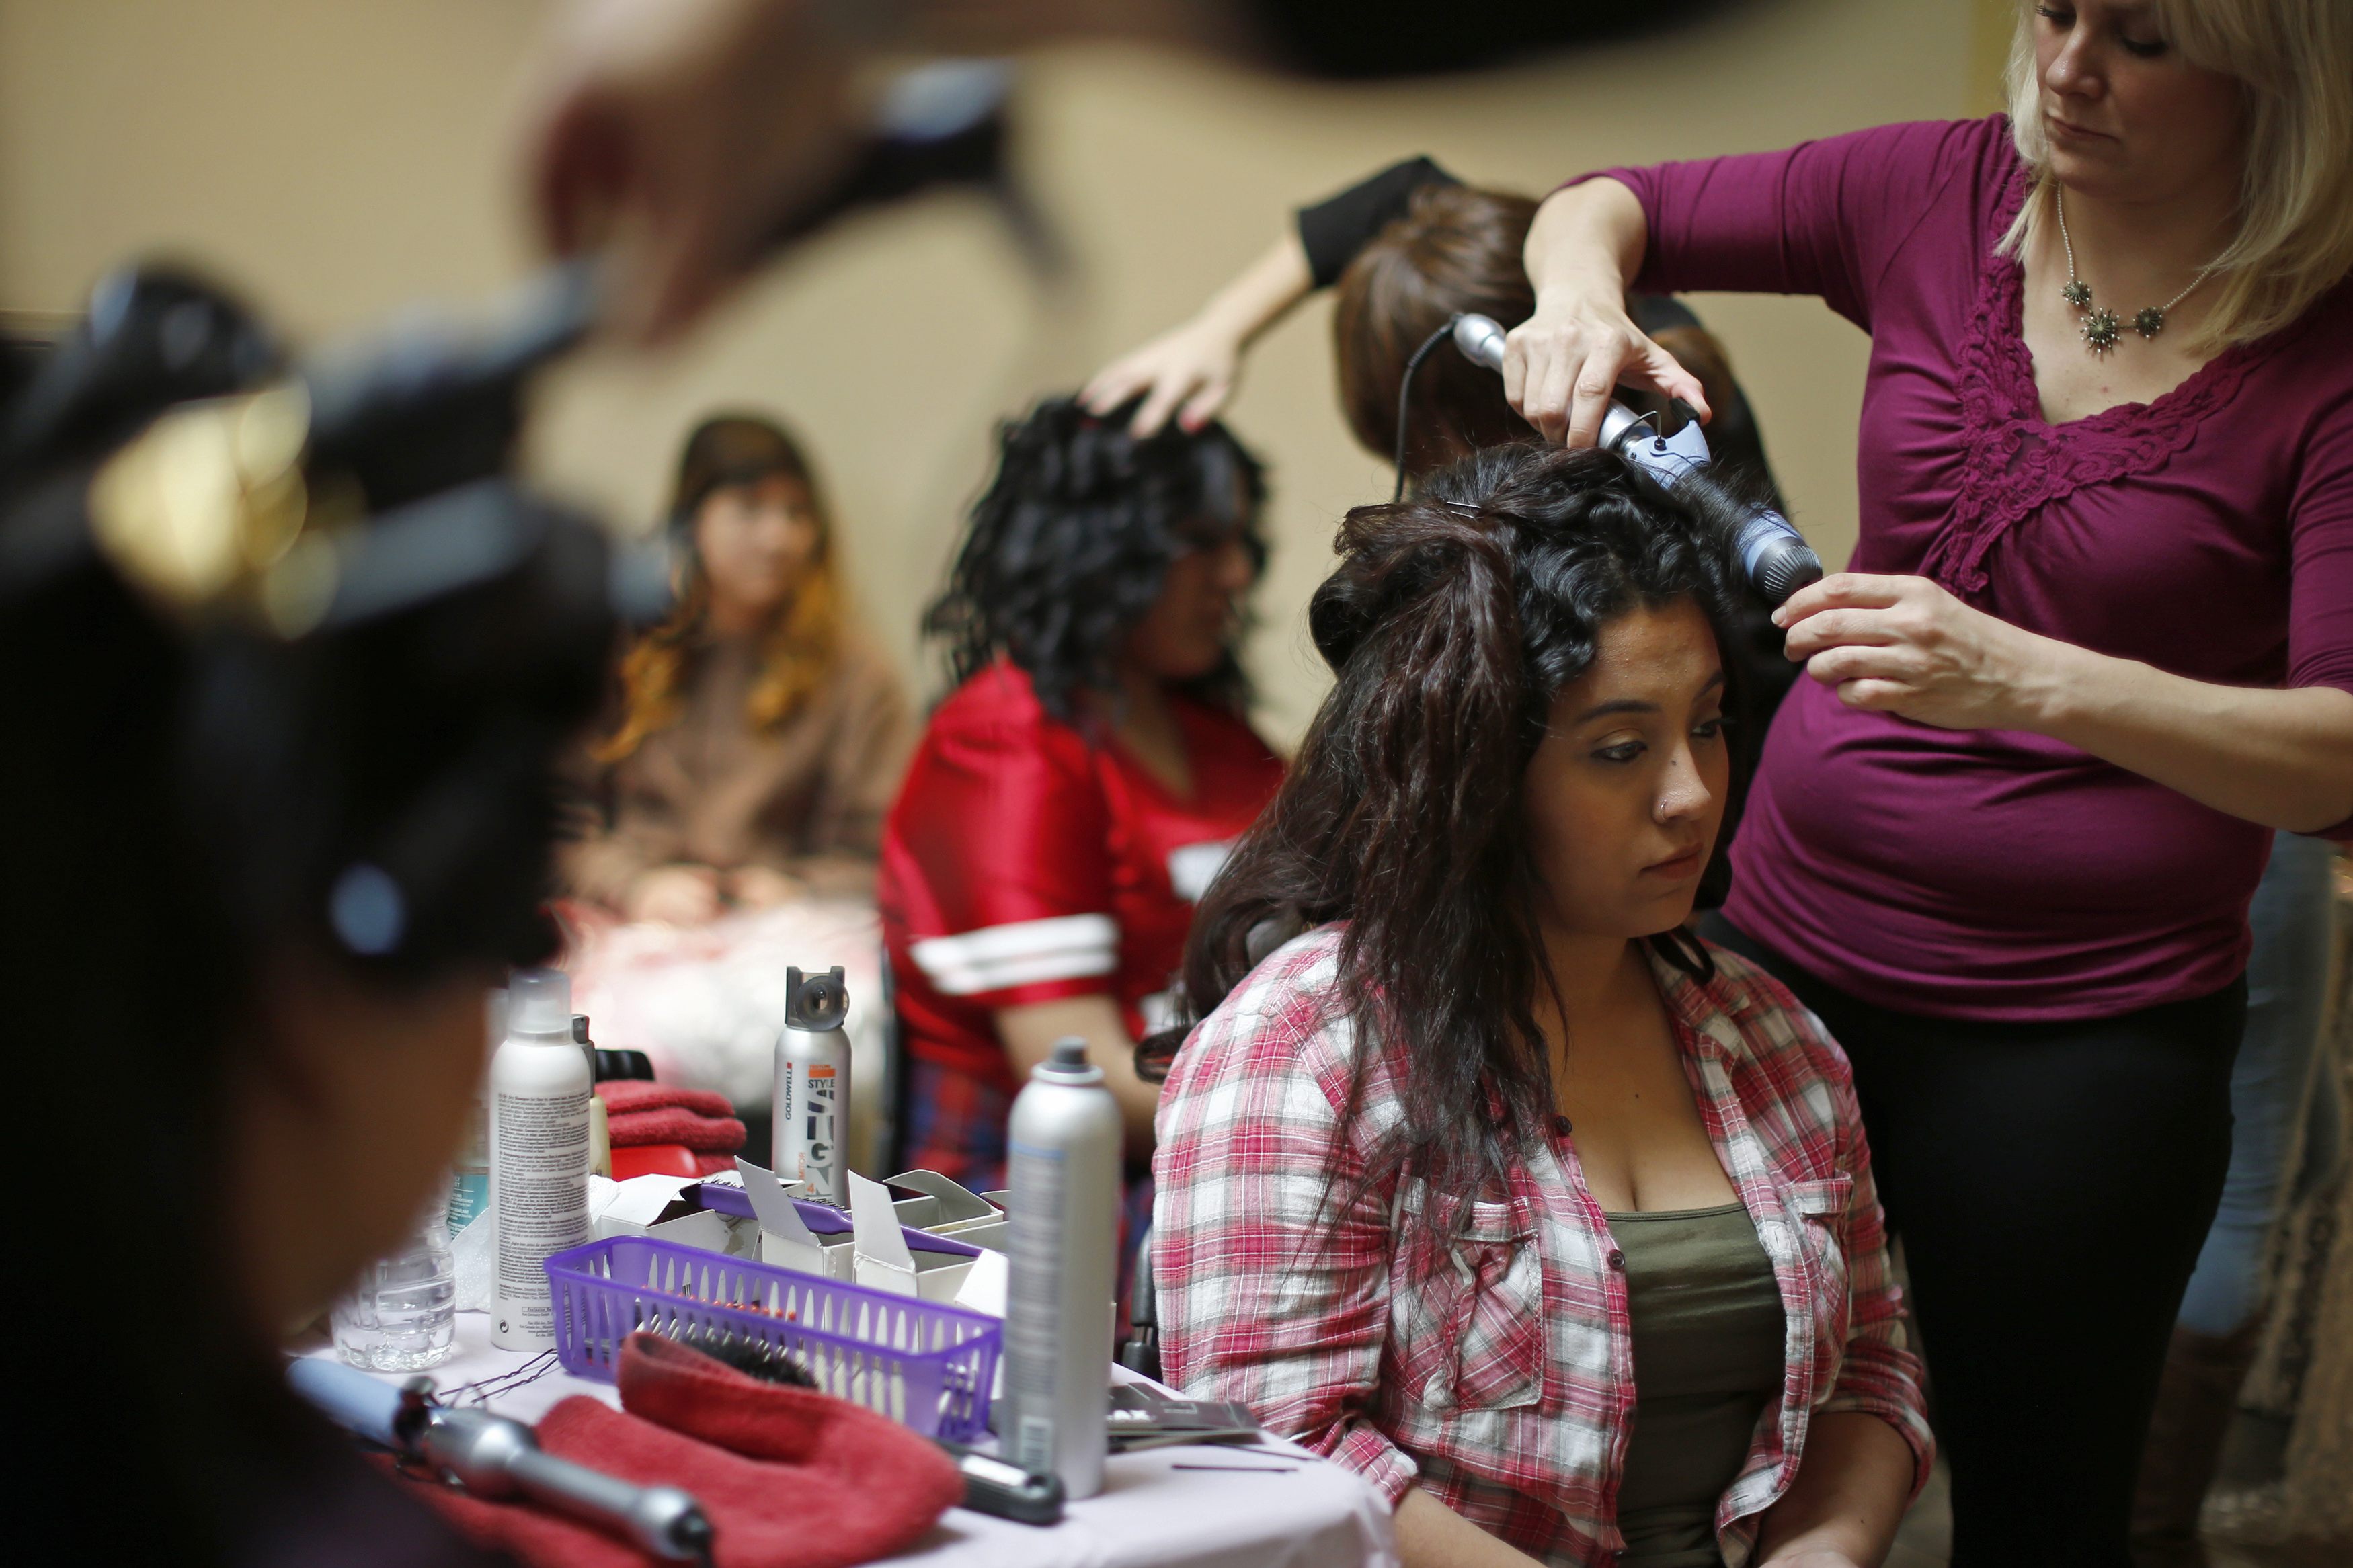 Adona Vazquez, 17, tries on a dress at an event that provides free prom dresses, shoes and accessories to 70 homeless and low income school girls from the Assistance League of Los Angeles, California March 5, 2015.